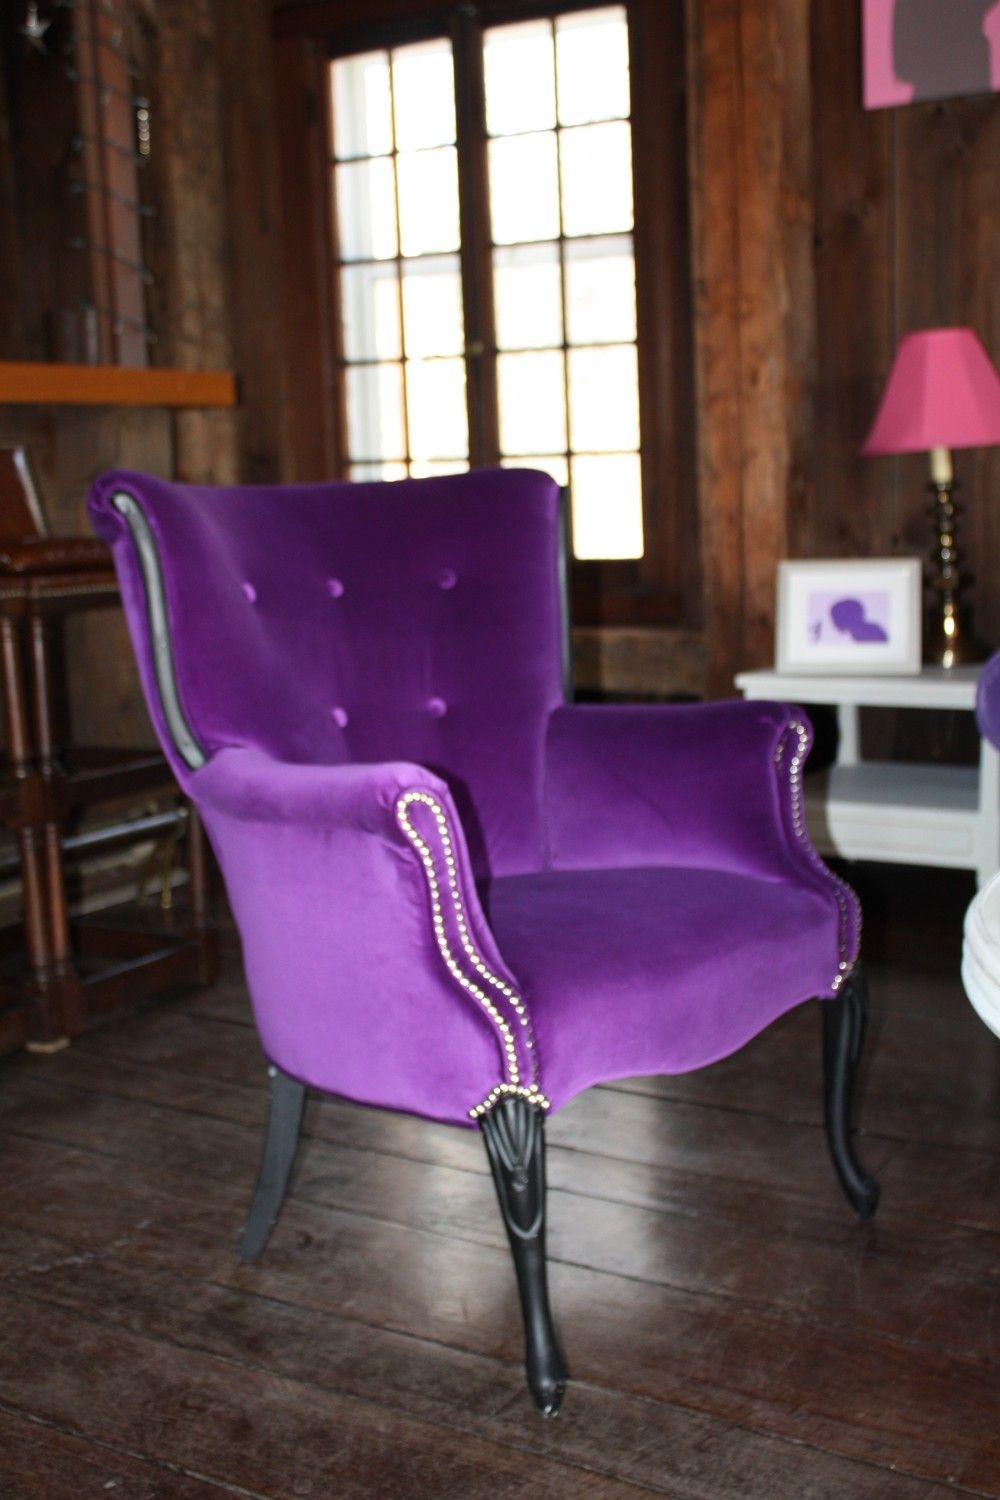 Purple velvet armchair i seriously just had a heart attack